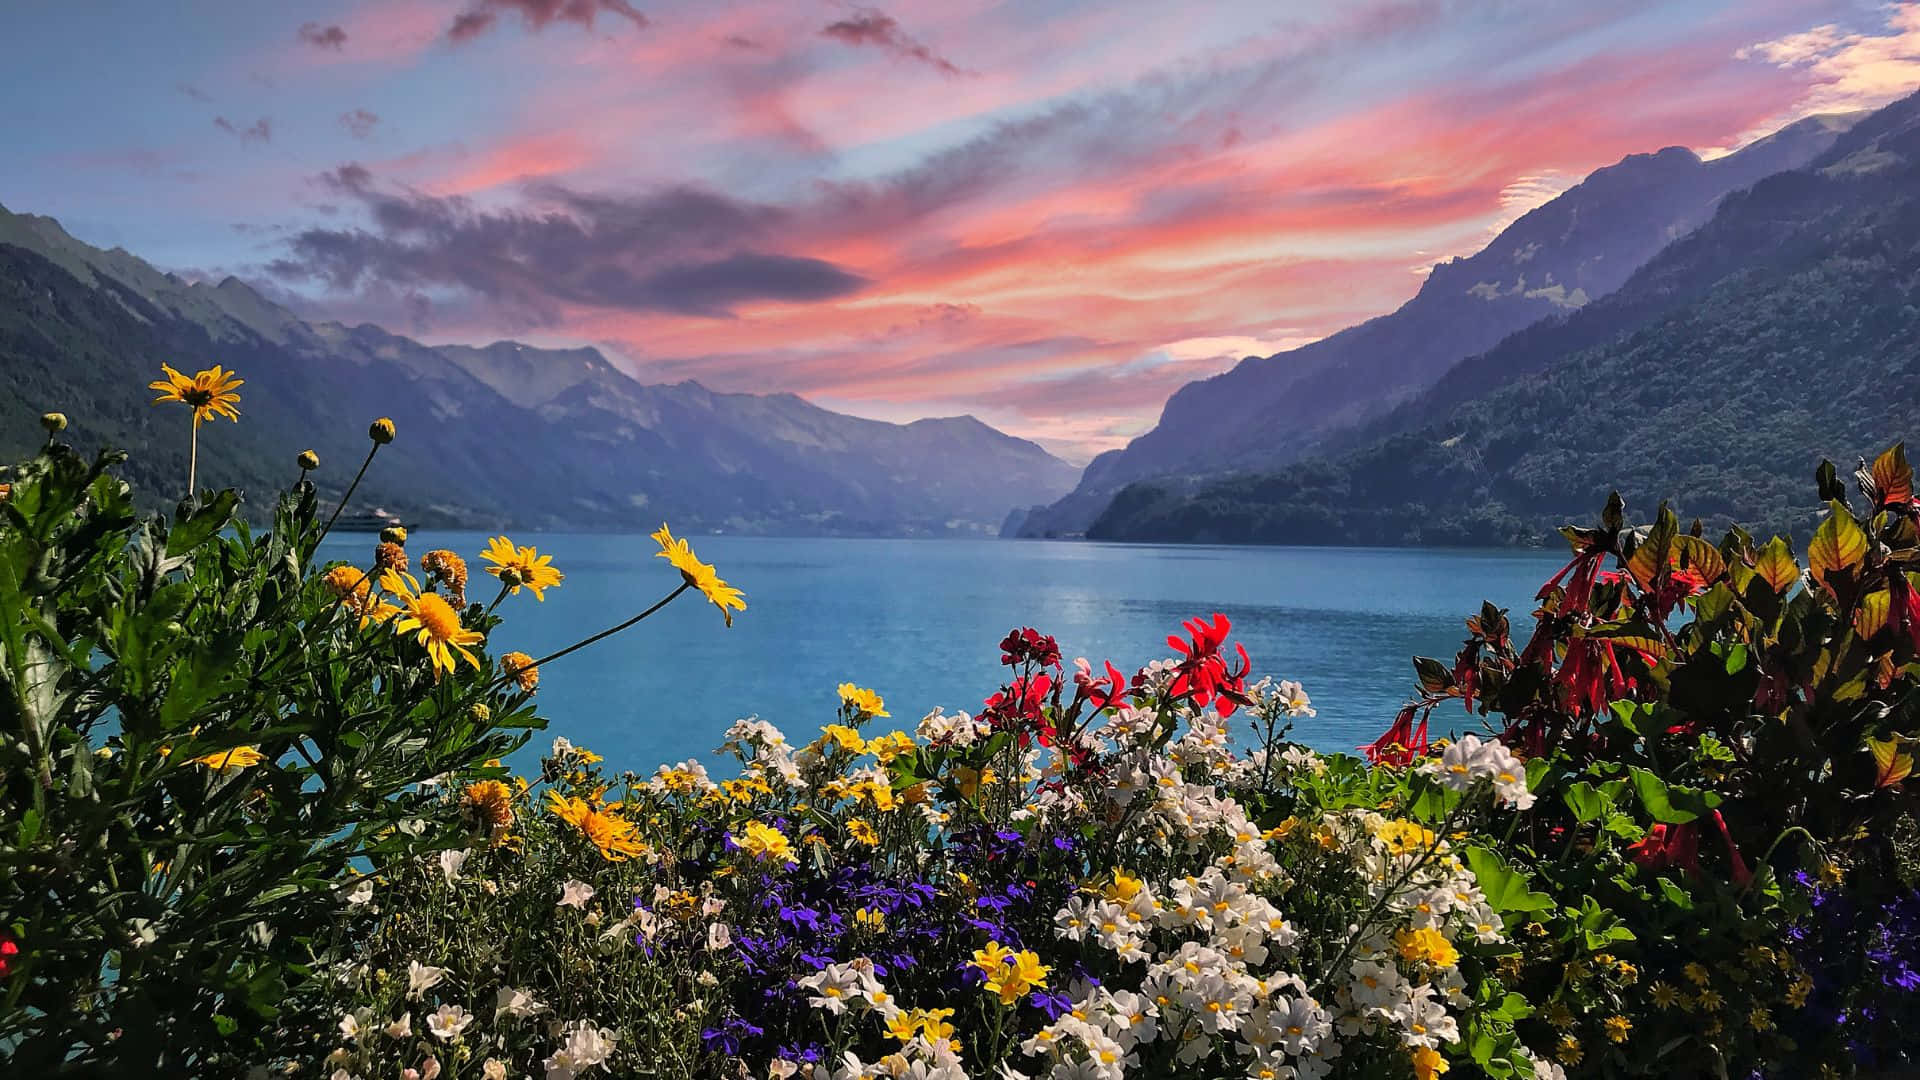 Download Stunning Swiss Landscape Panorama | Wallpapers.com